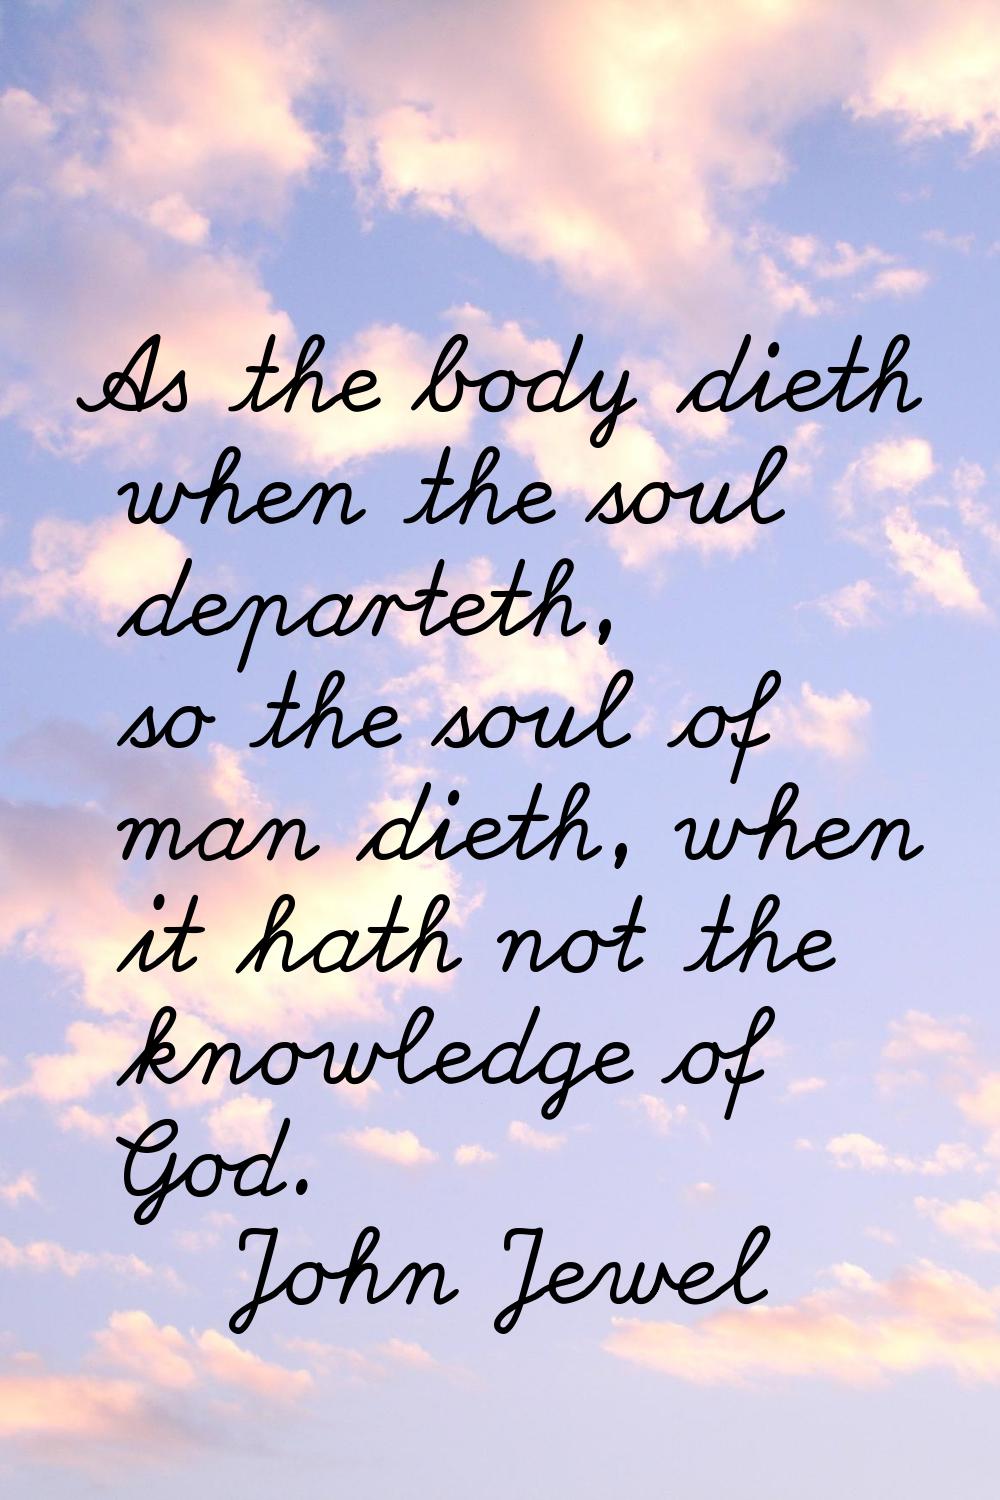 As the body dieth when the soul departeth, so the soul of man dieth, when it hath not the knowledge